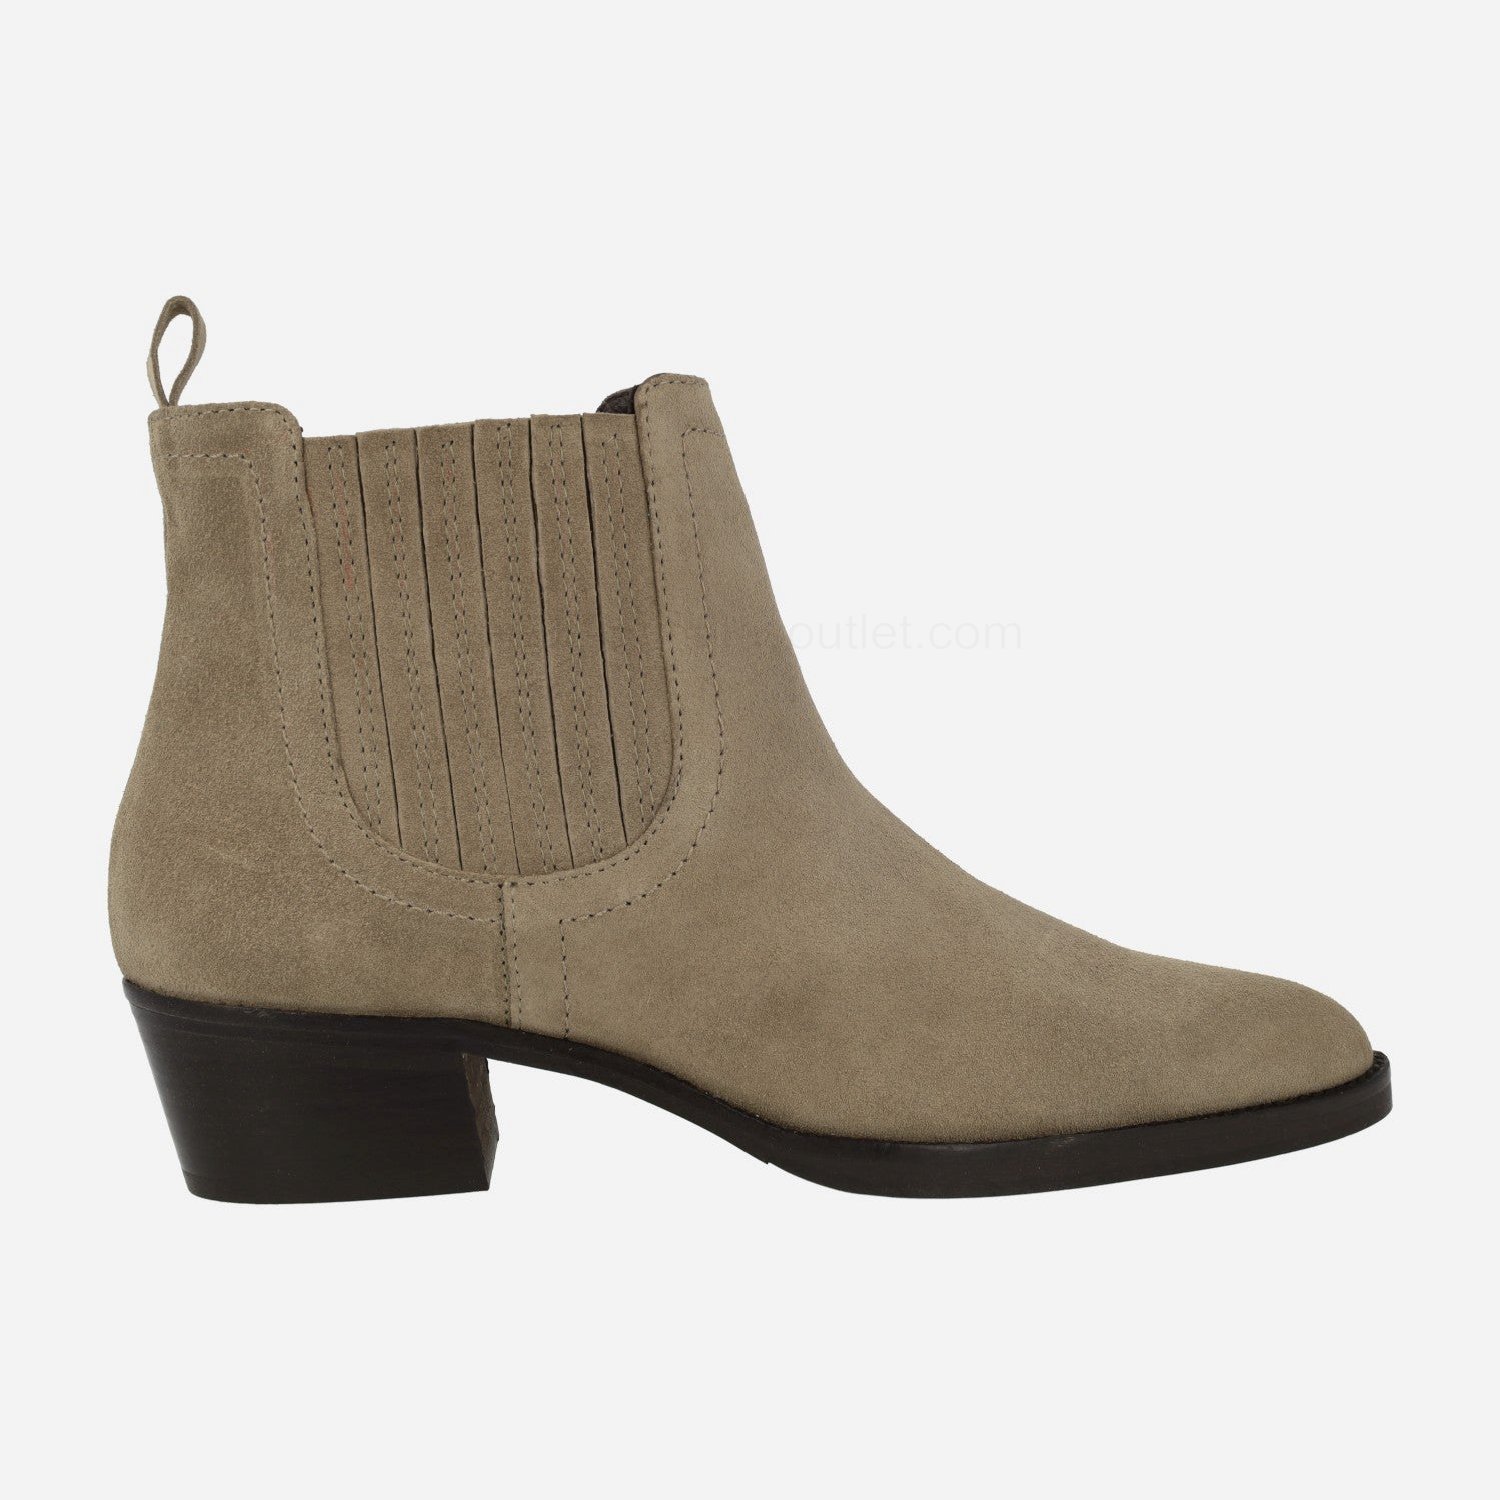 (image for) Hobro chelsea boots in taupe suede | pedro miralles outlet-1797